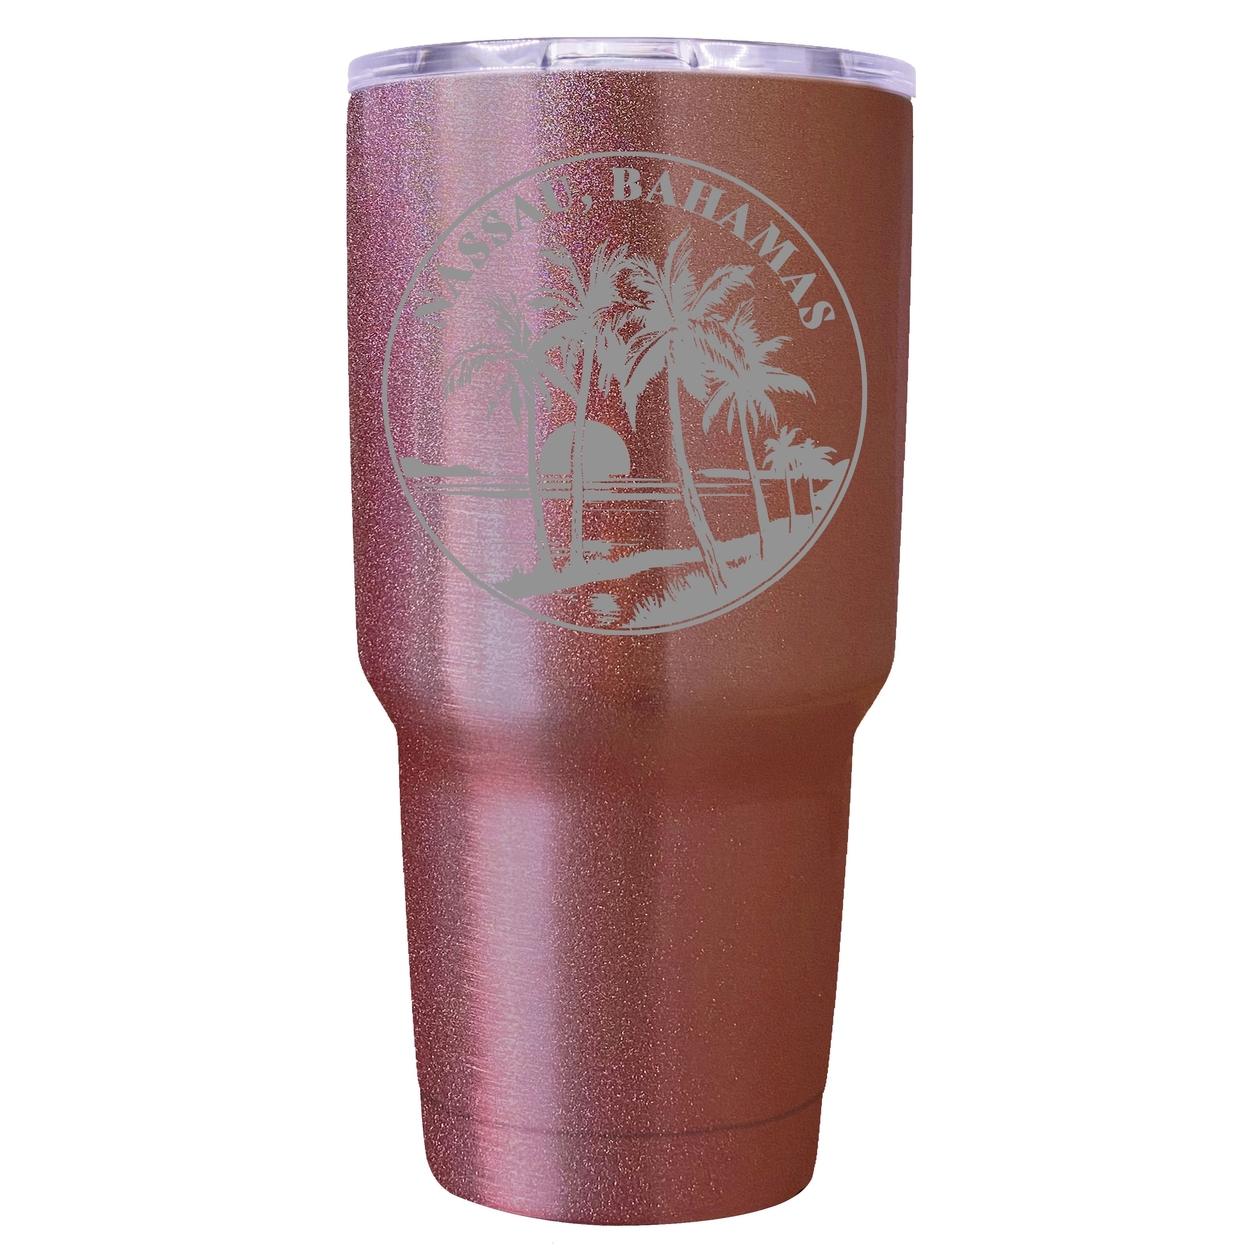 Nassau The Bahamas Souvenir 24 Oz Engraved Insulated Stainless Steel Tumbler - Green,,4-Pack